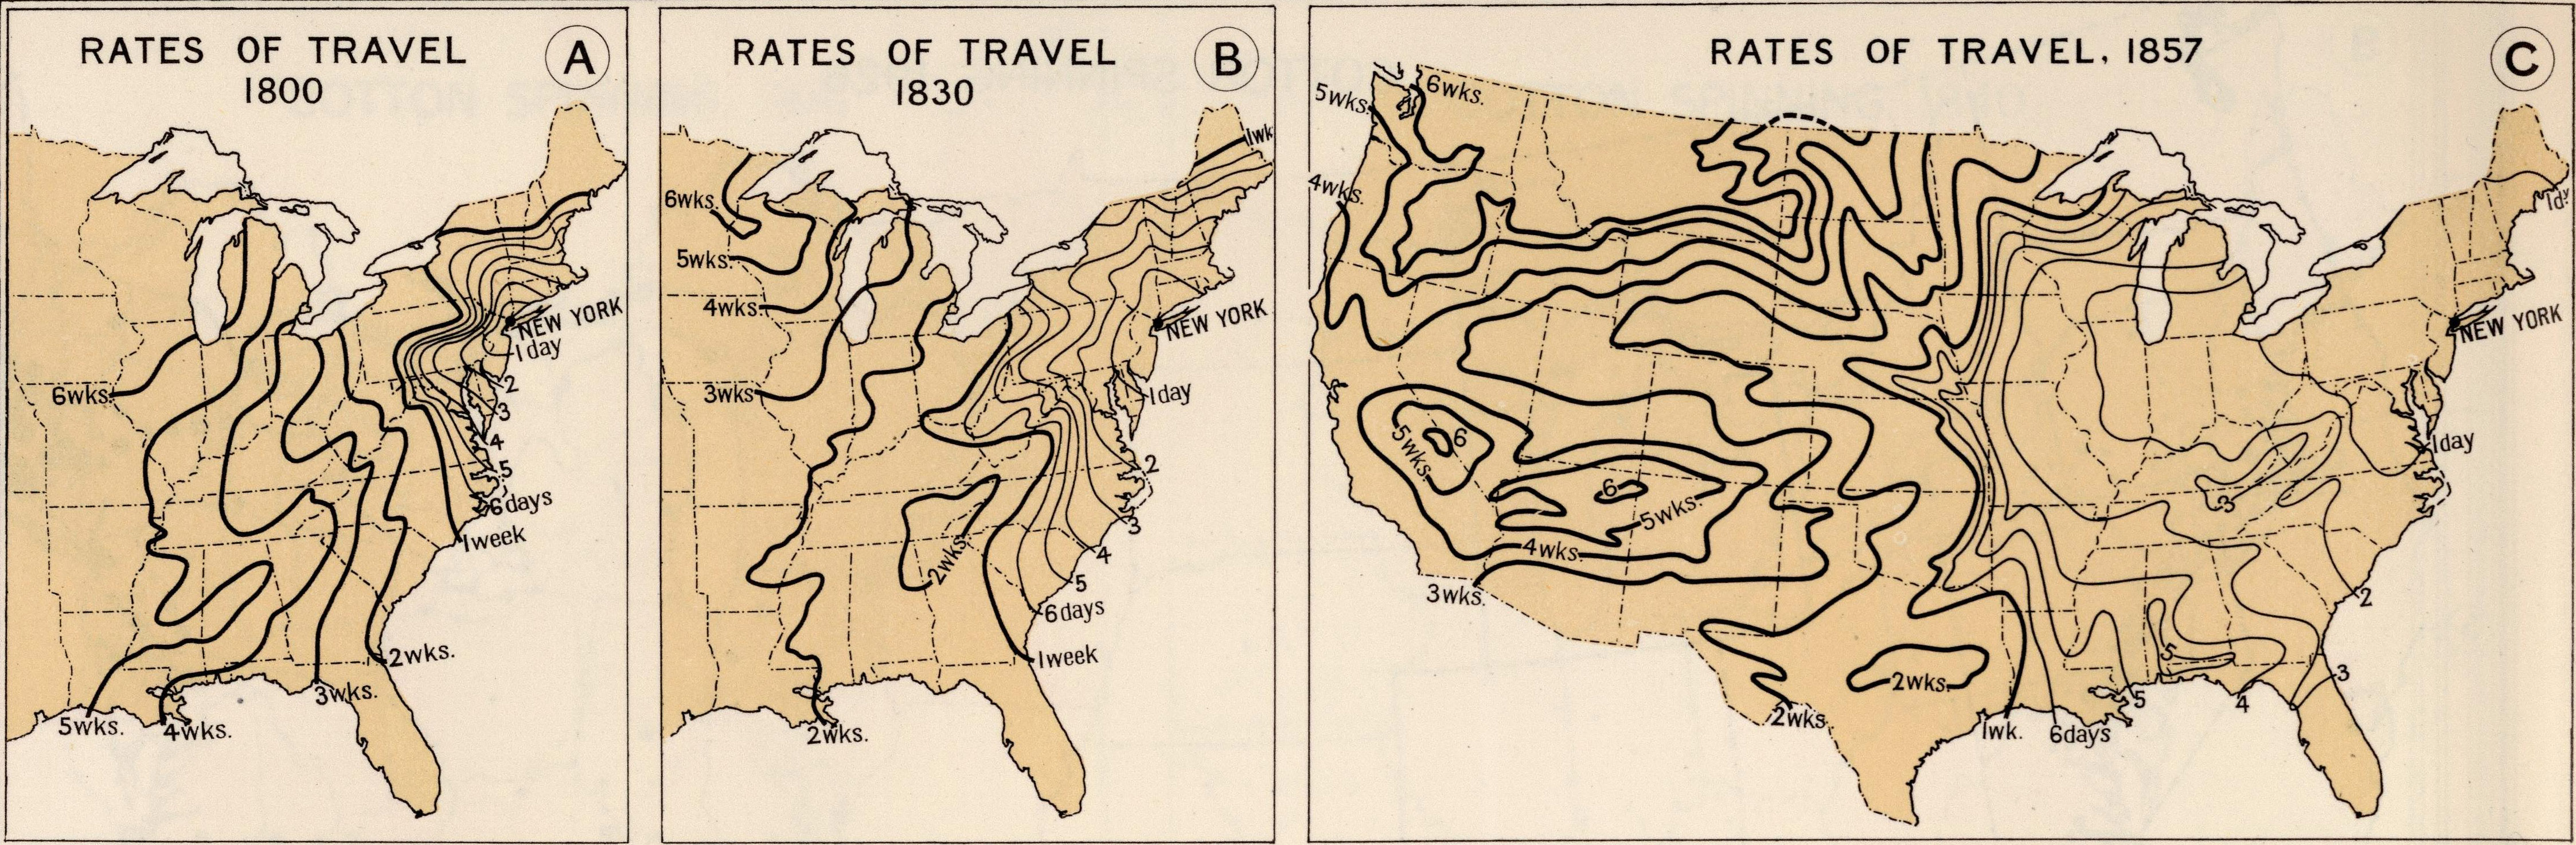 rates of travel 1800-57